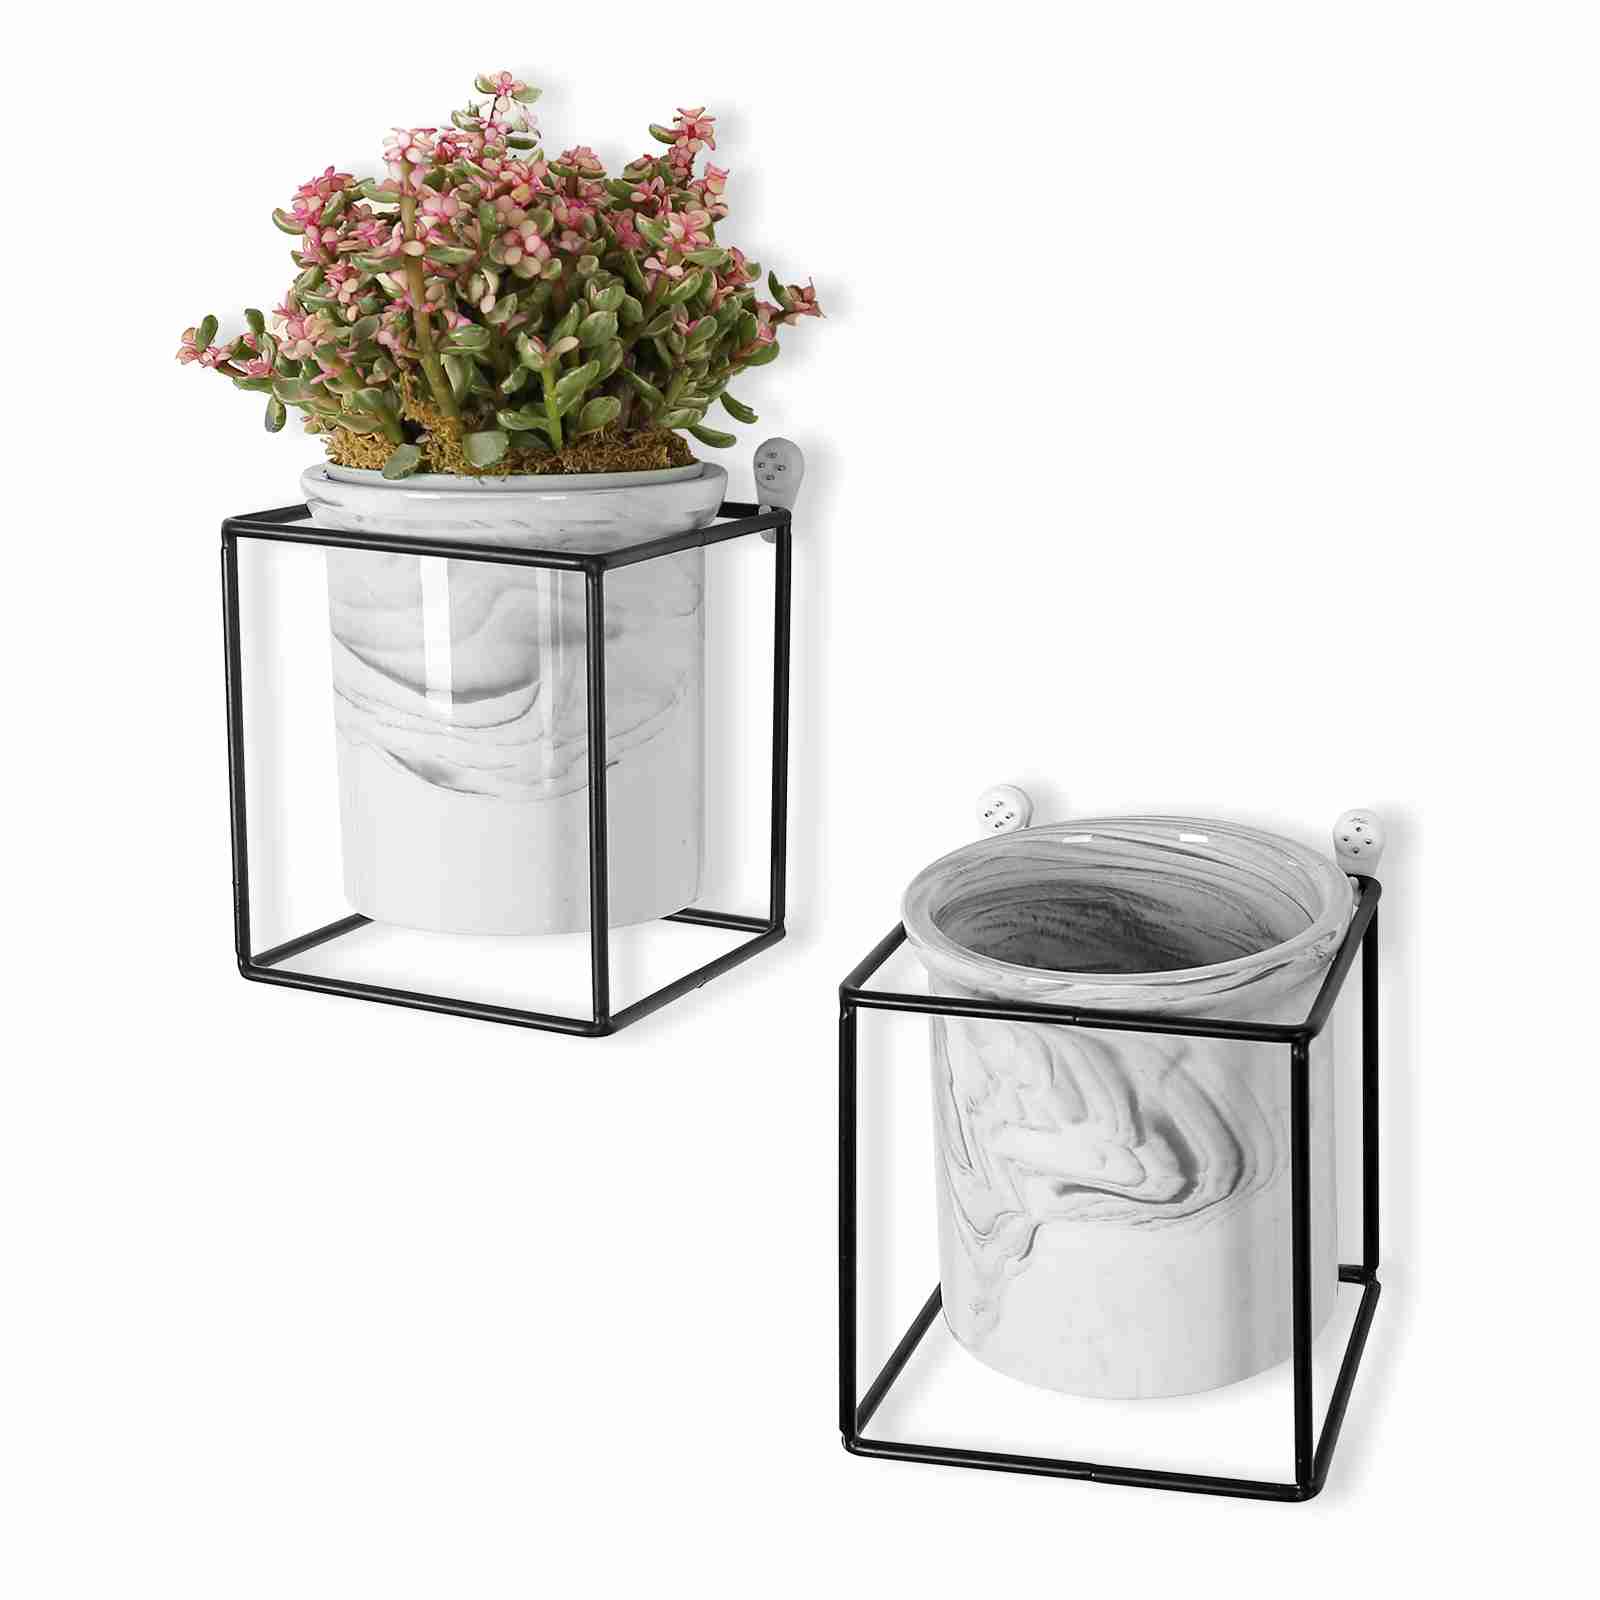 wall-planter with cash back rebate